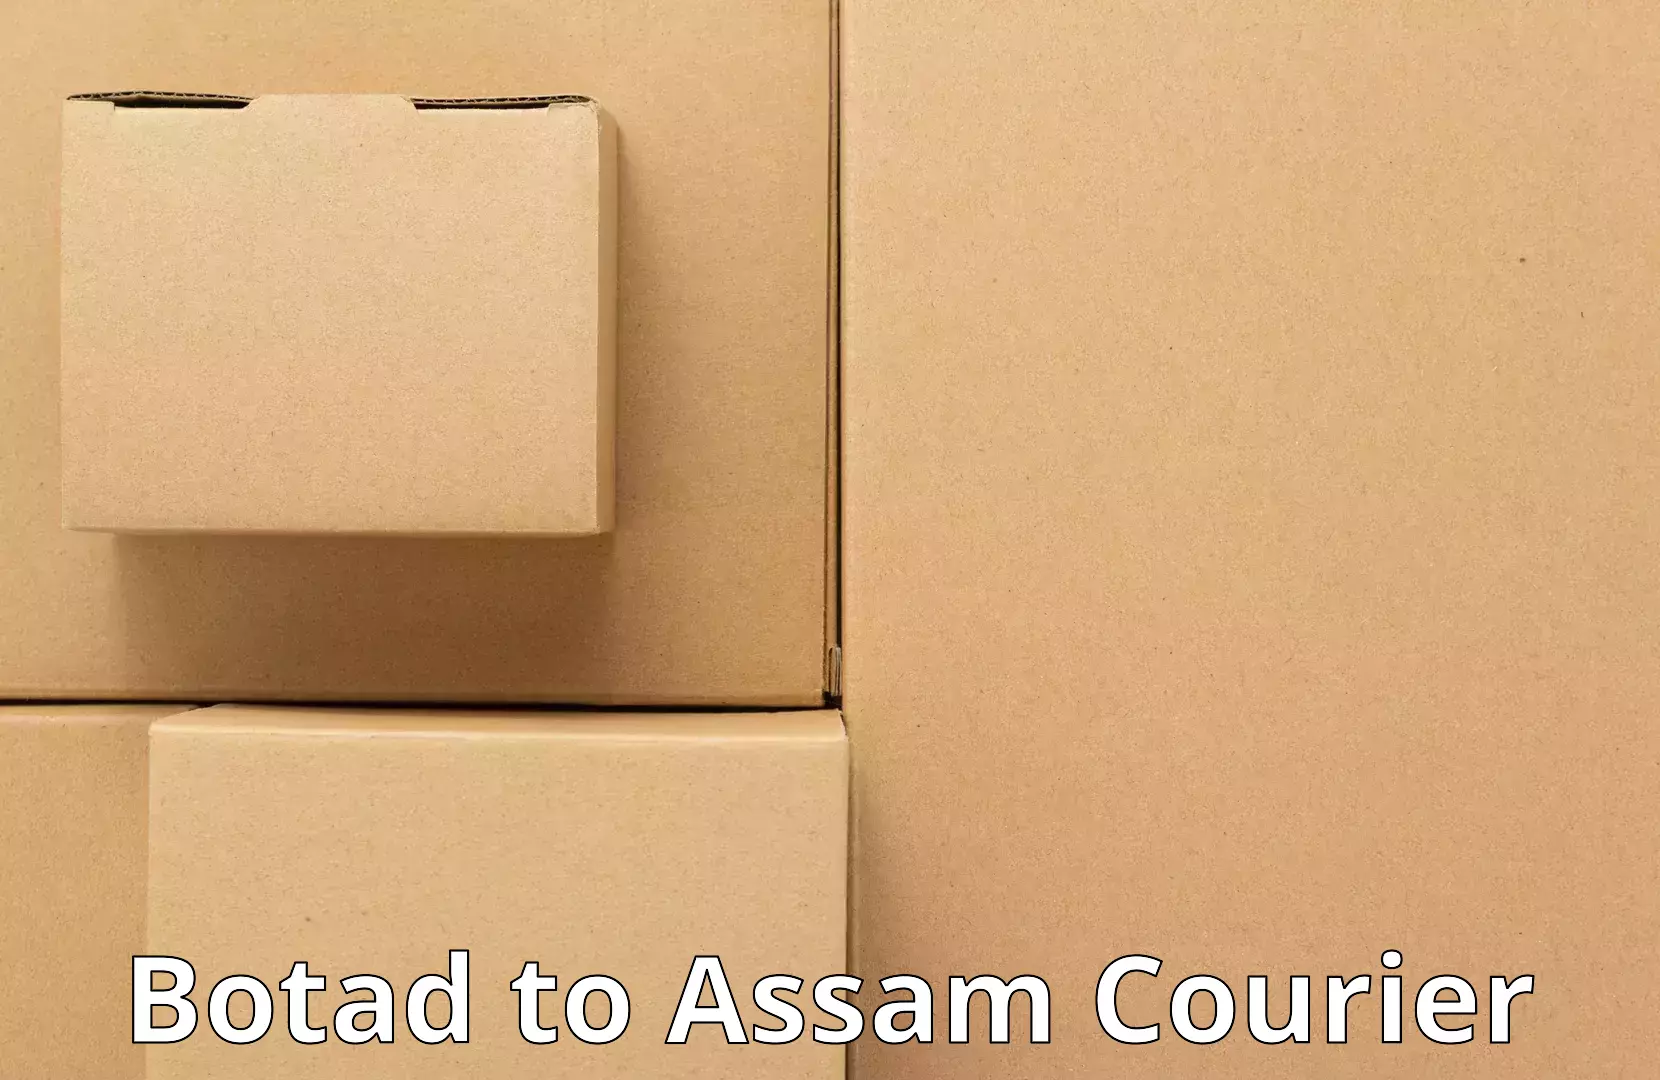 Professional moving strategies in Botad to Assam